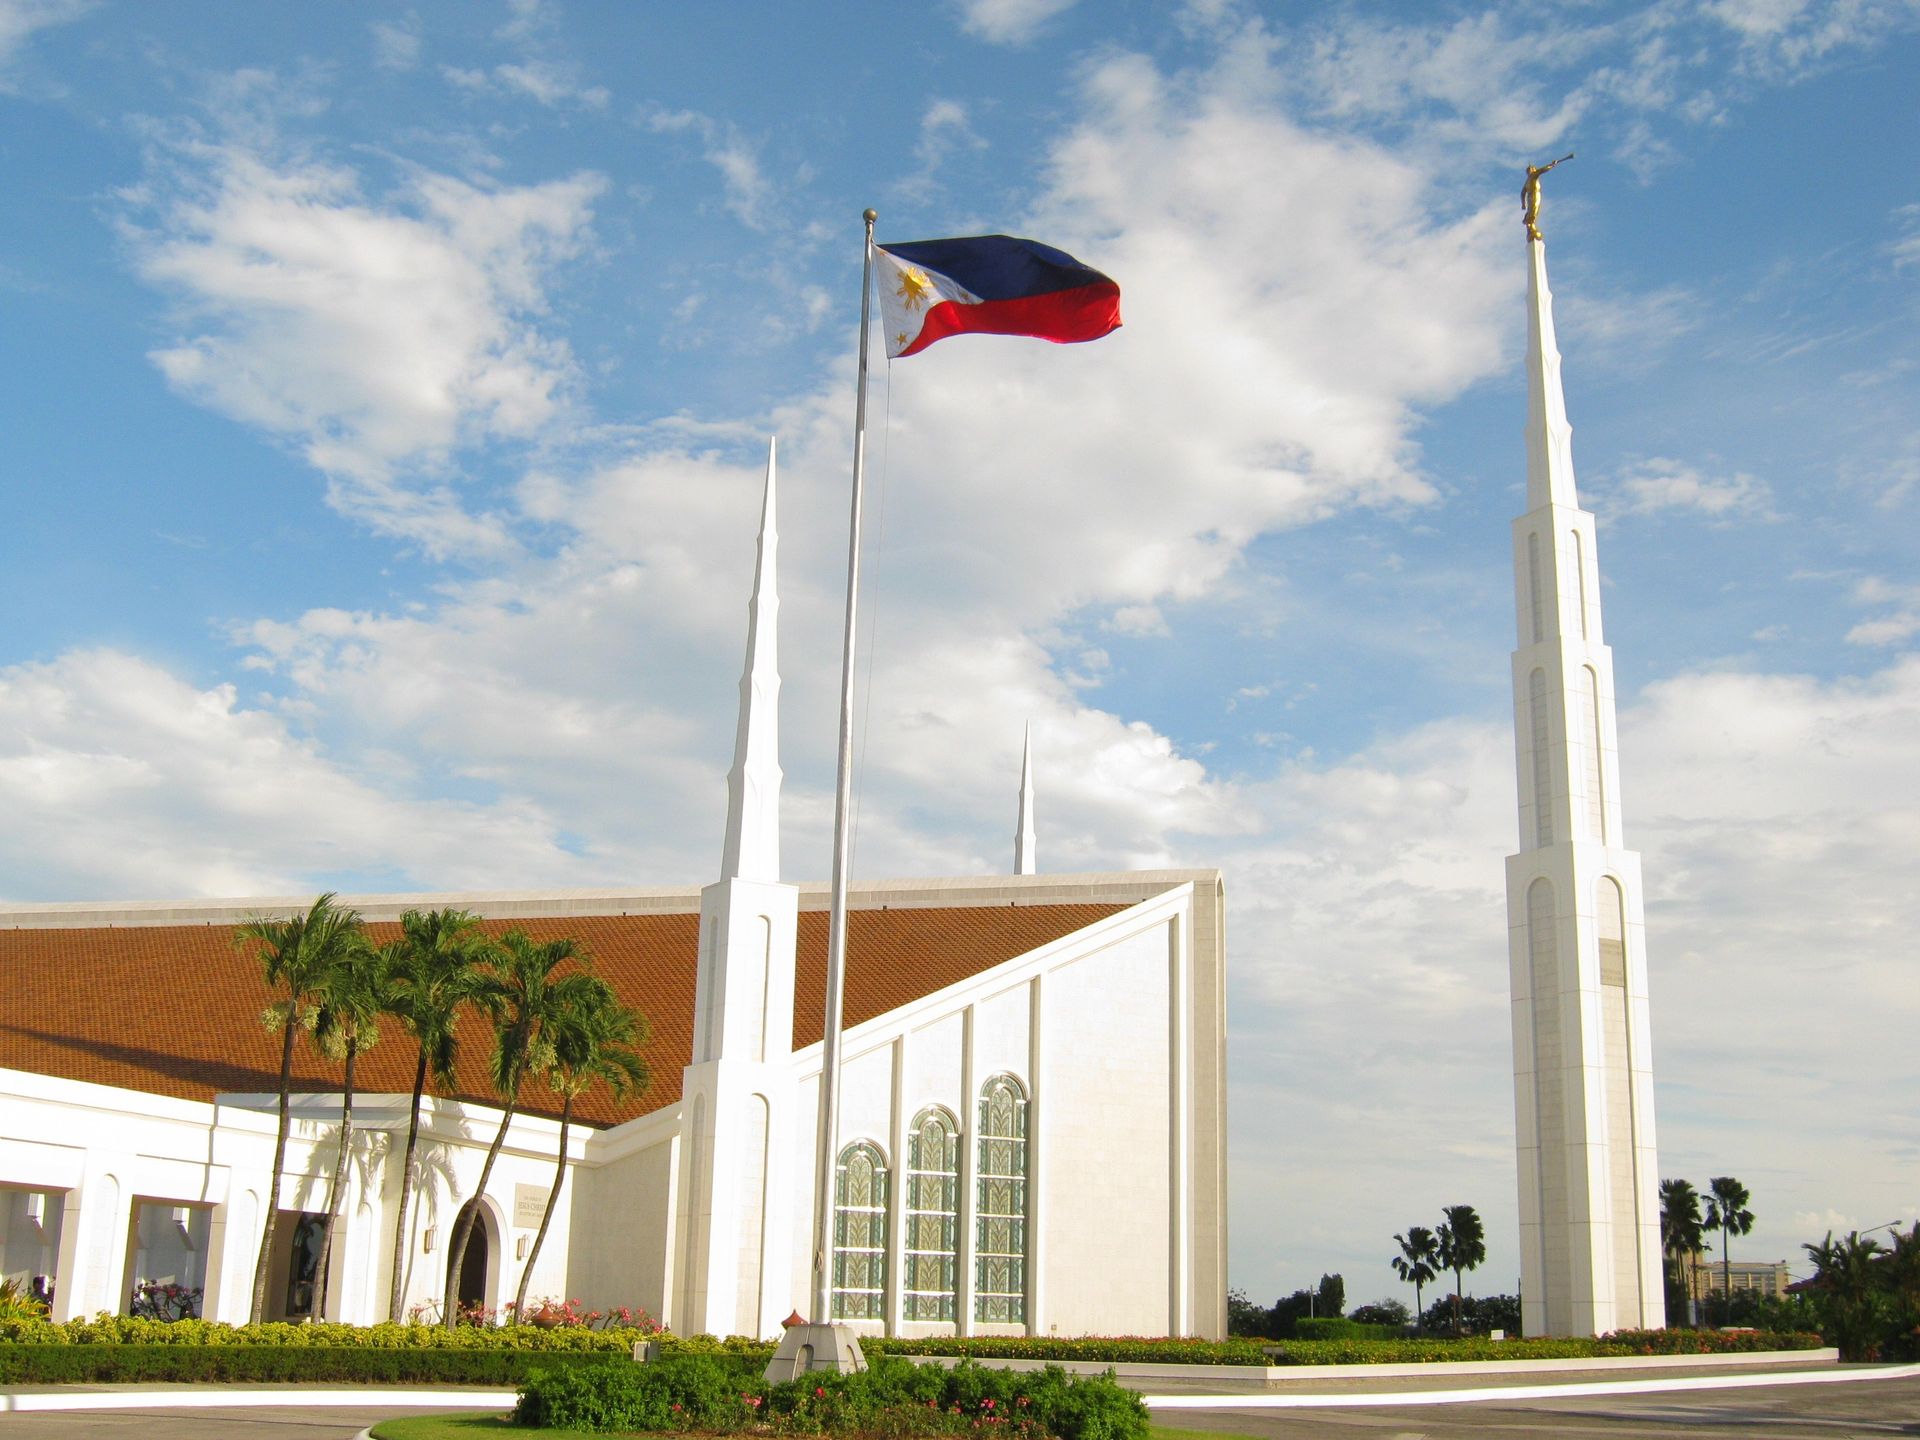 The Manila Philippines Temple, including the entrance and spires.